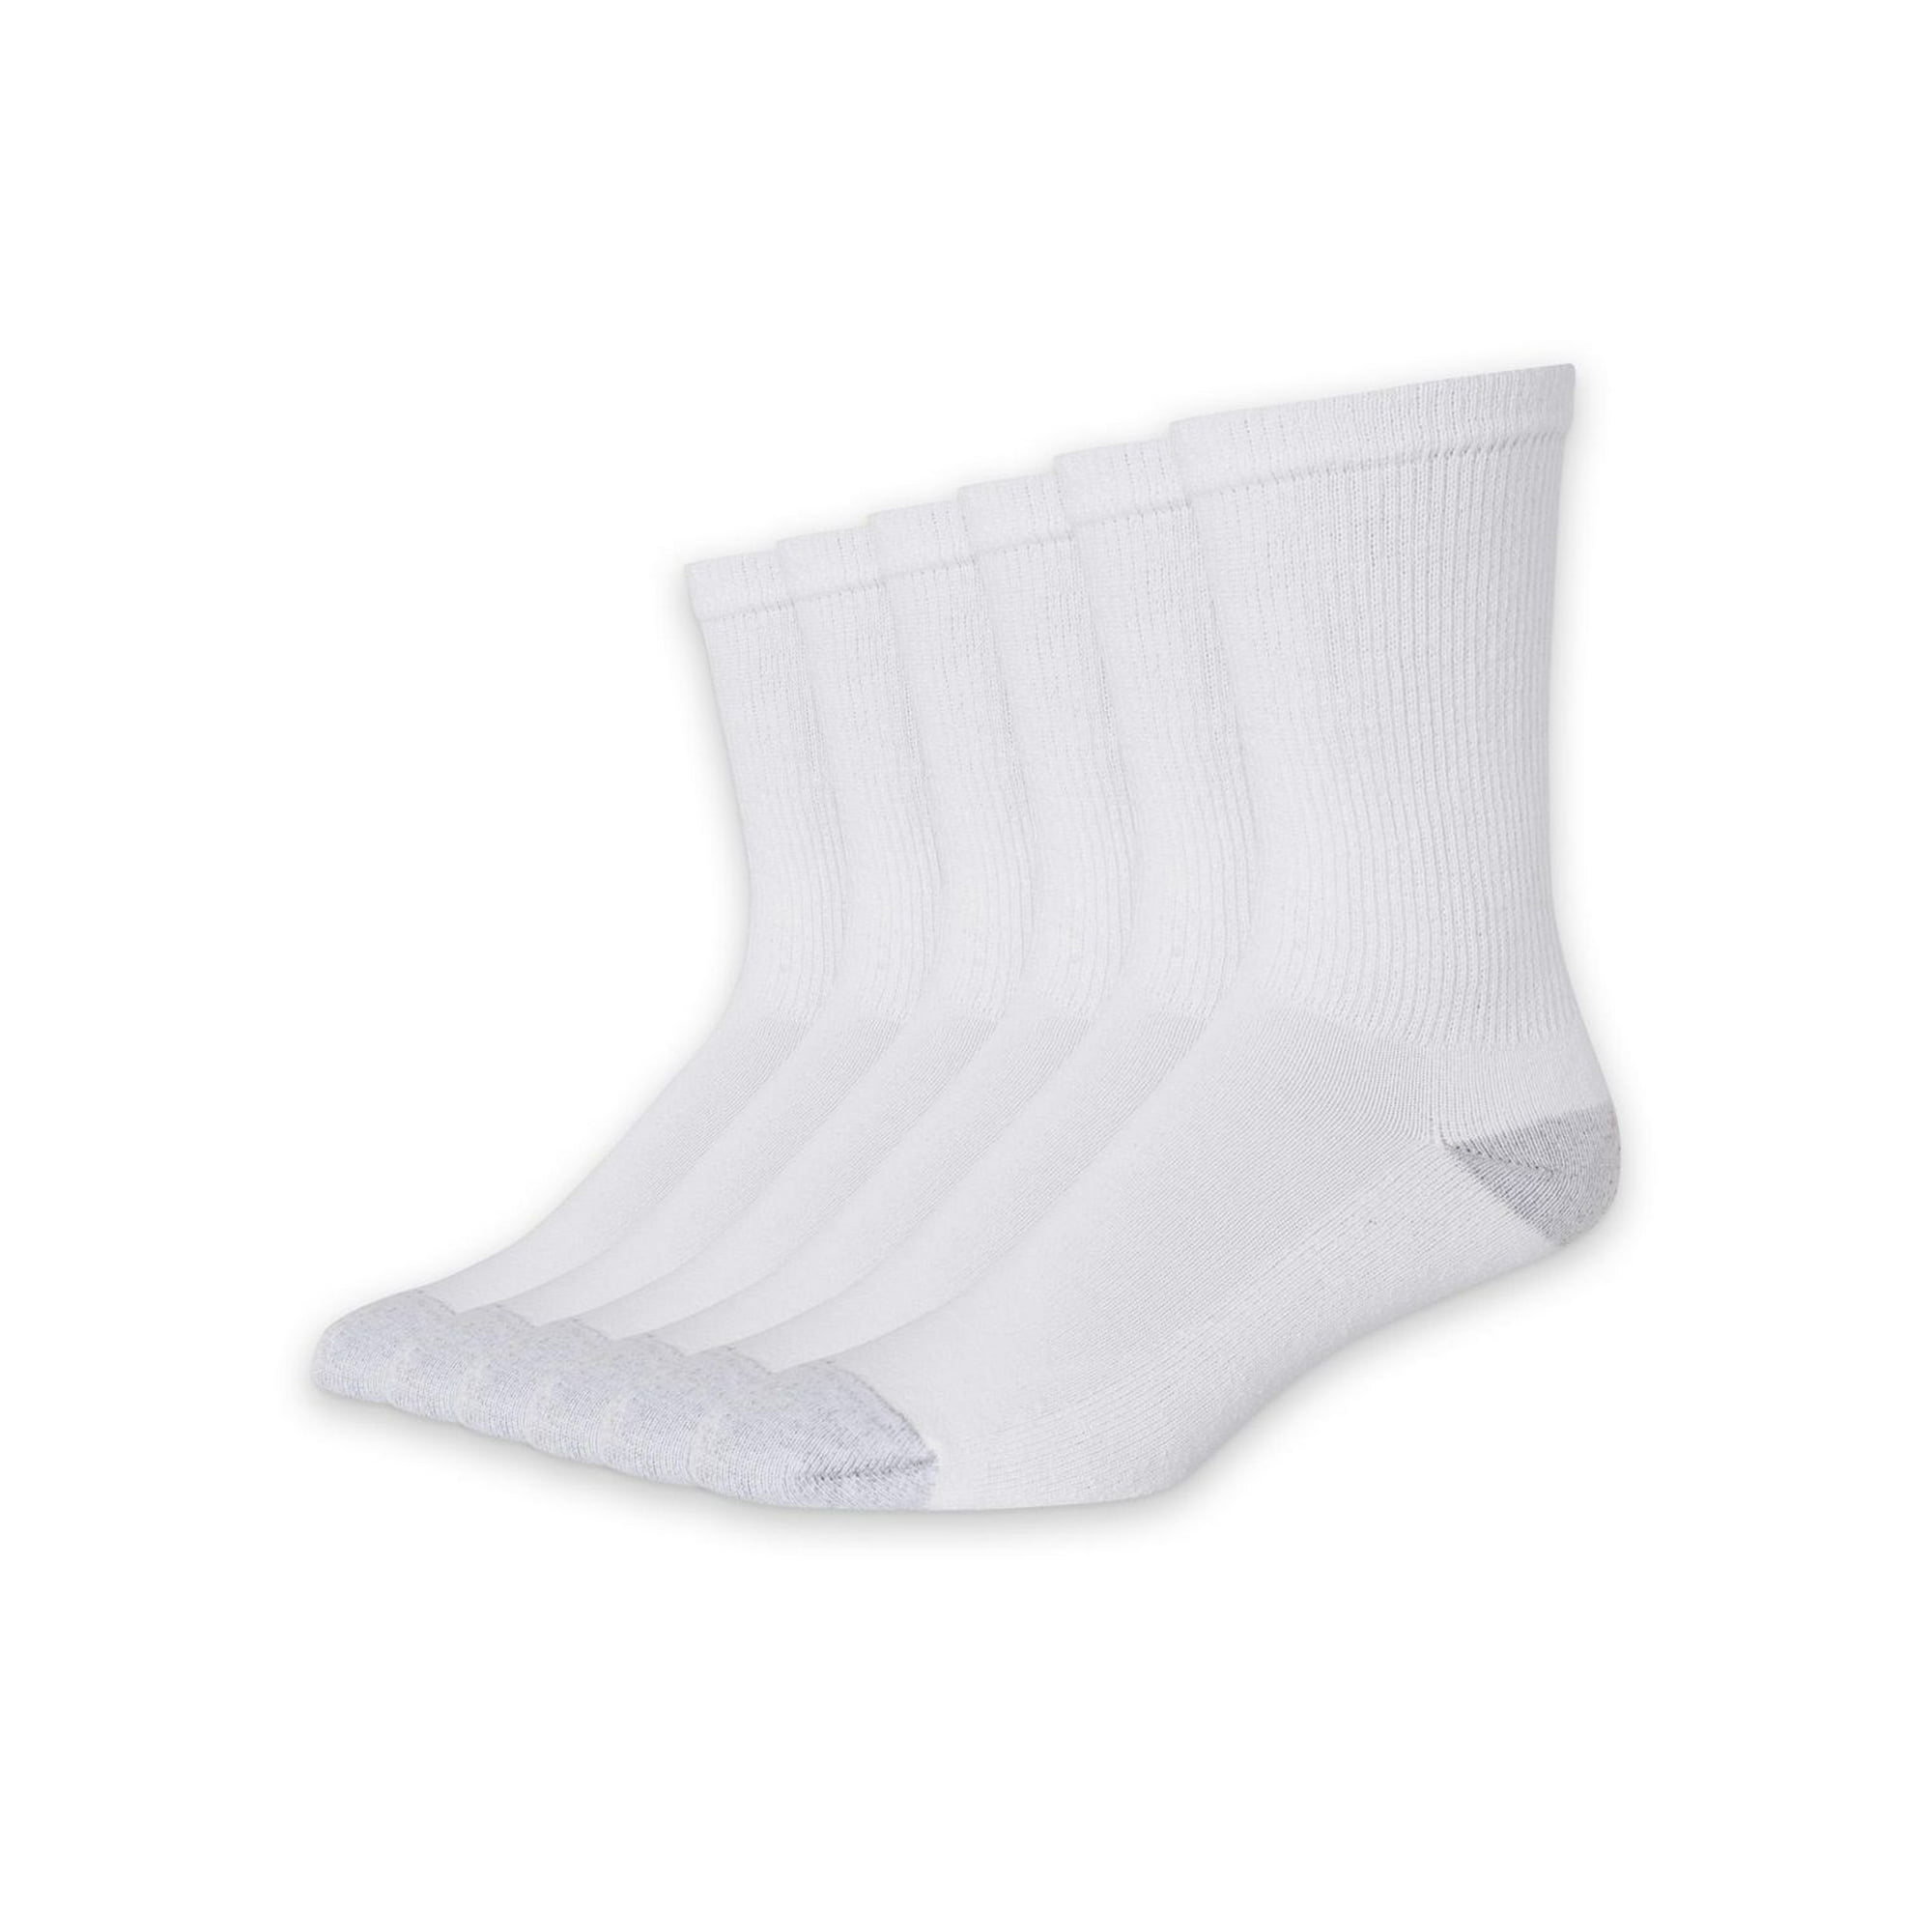 Under Armour Training White Cotton Low Cut 6-Pack Socks